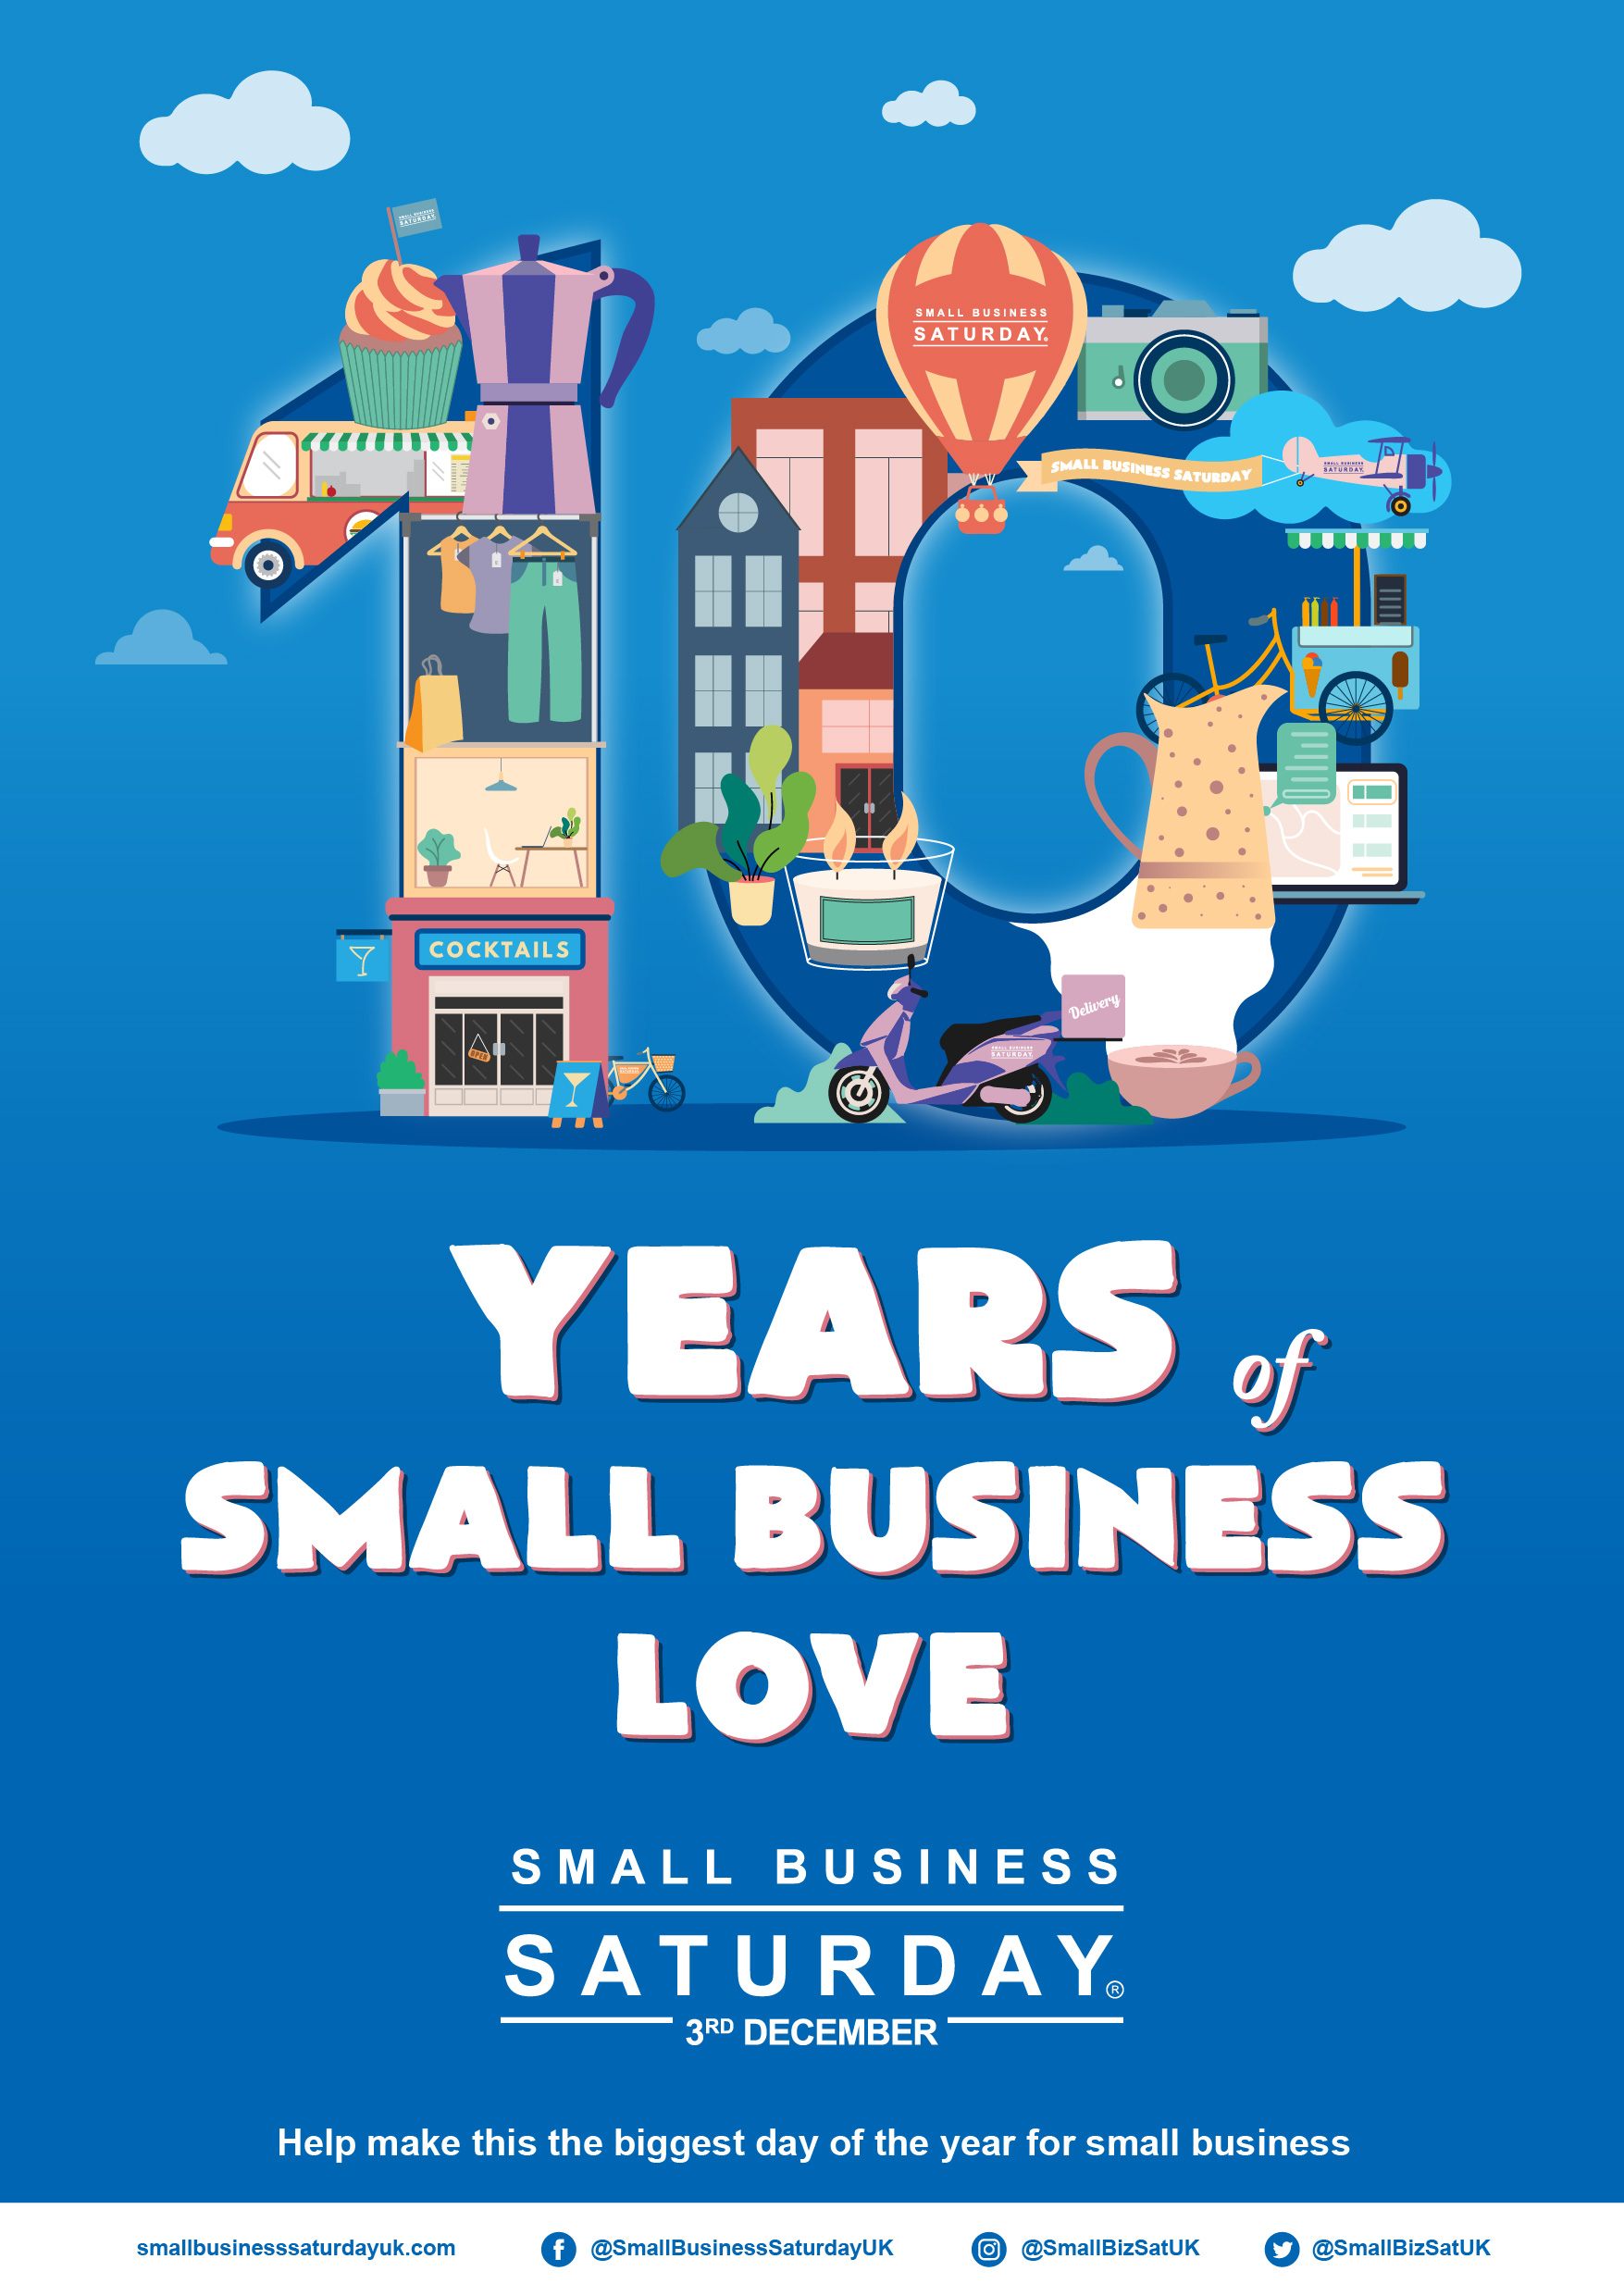 Small Business Saturday is coming on December 3